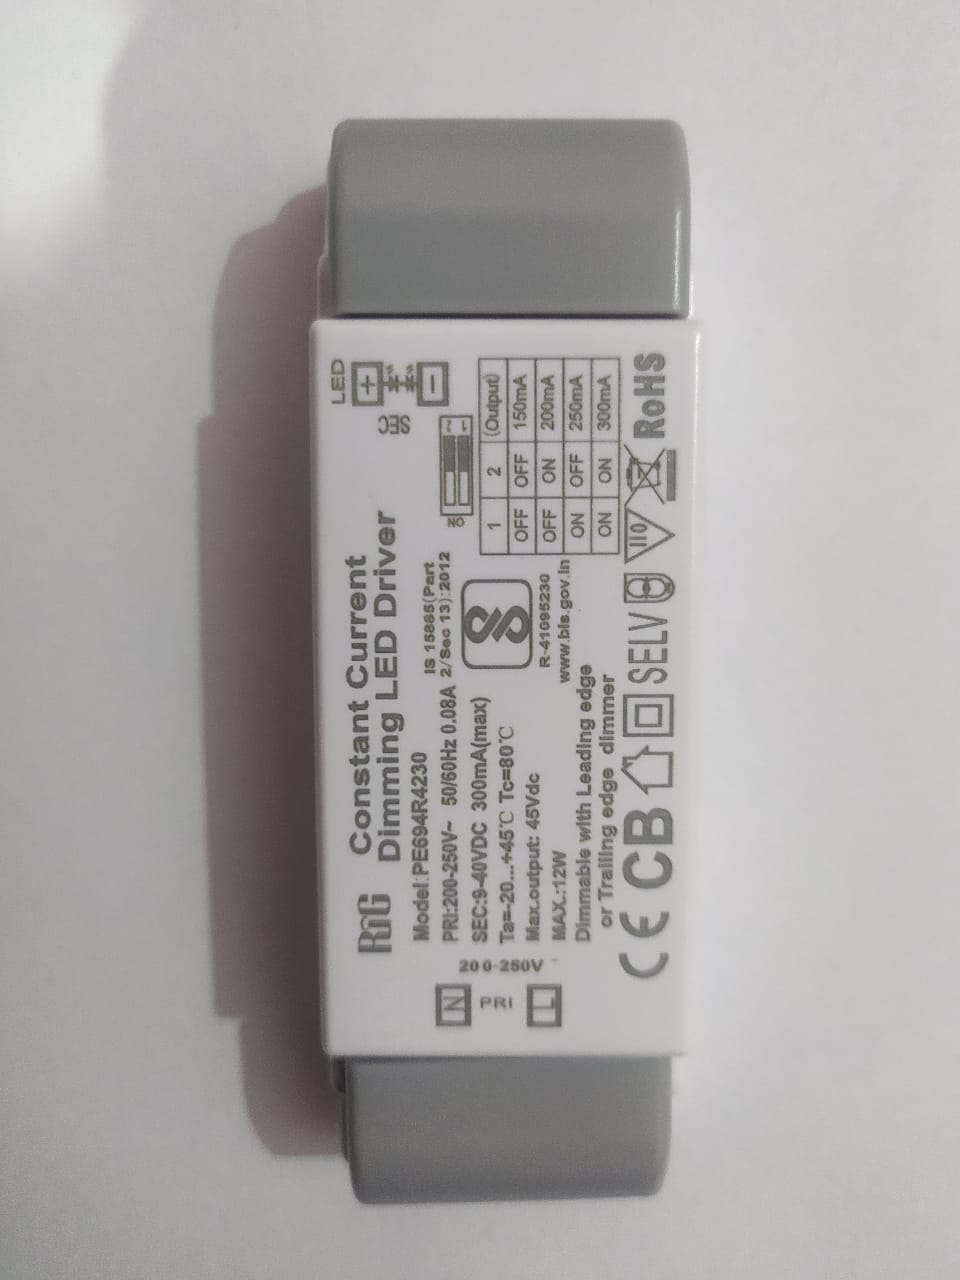 dali dimmable led driver